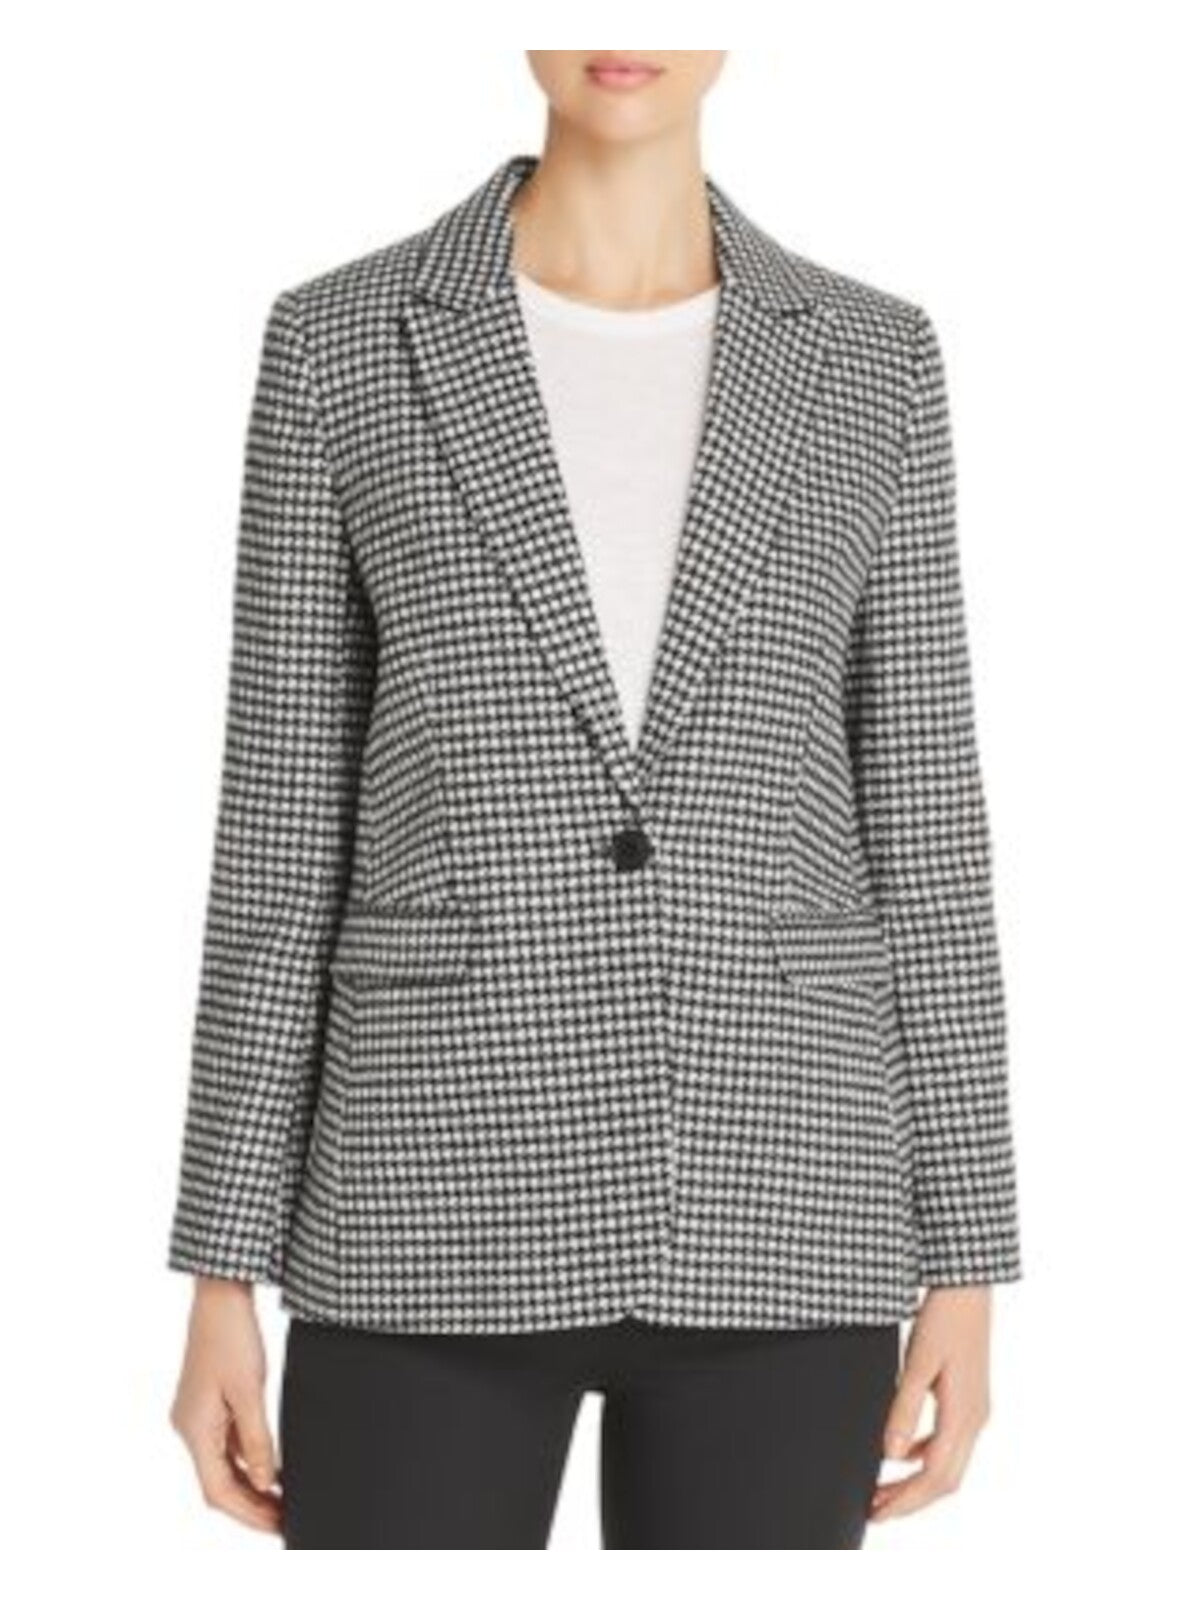 MKT STUDIO Womens Black Wool Blend Pocketed Single-breasted Lined Houndstooth Long Sleeve Collared Wear To Work Blazer Jacket 36